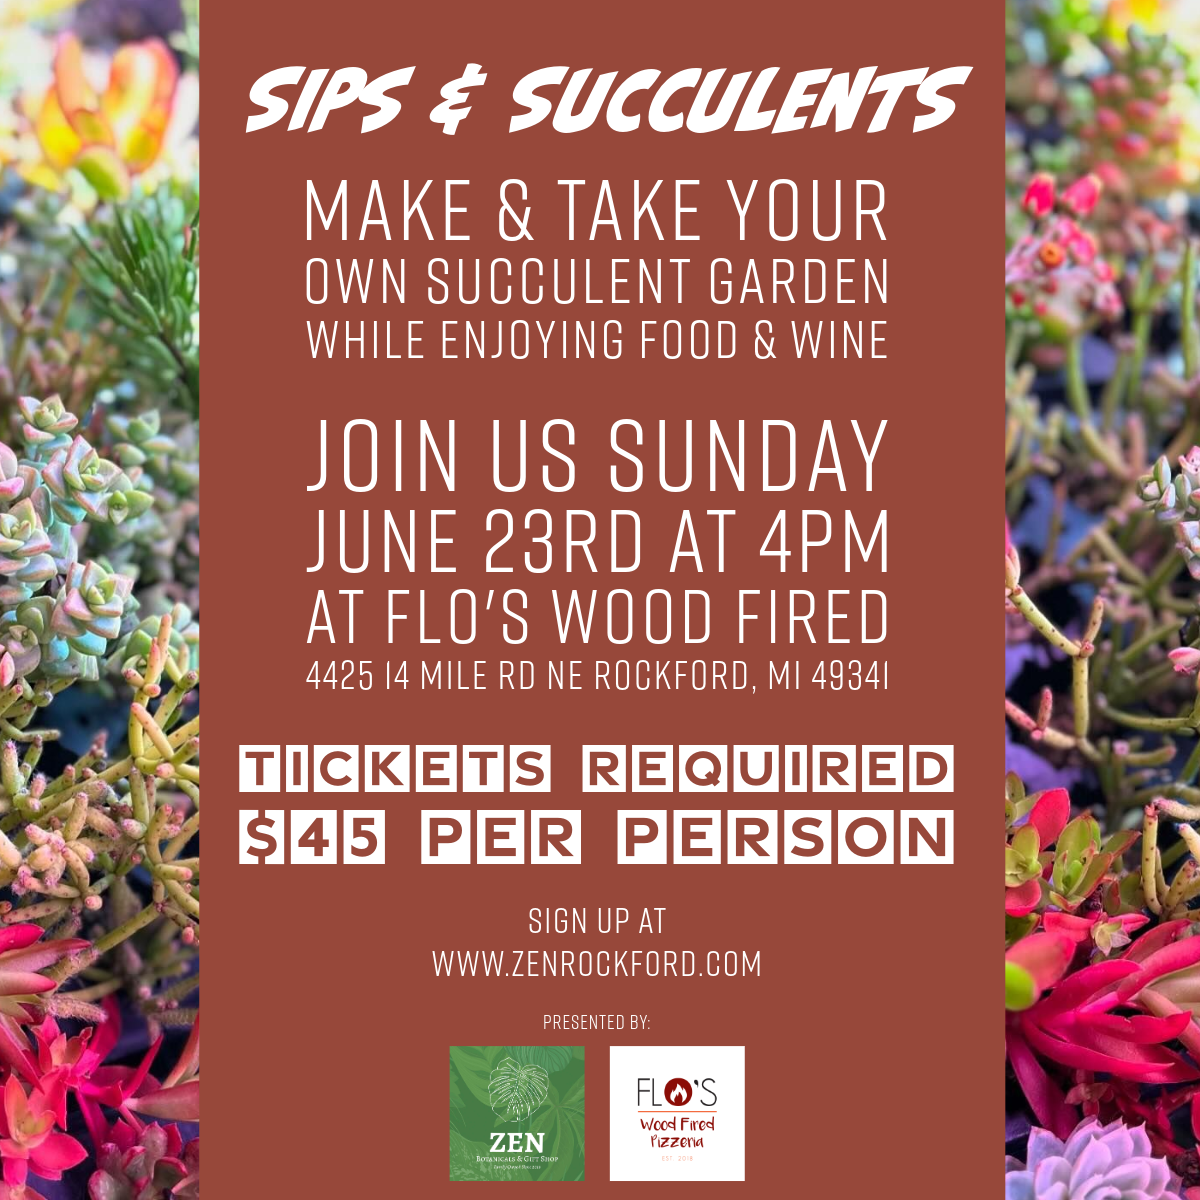 Sips & Succulents Event Tickets